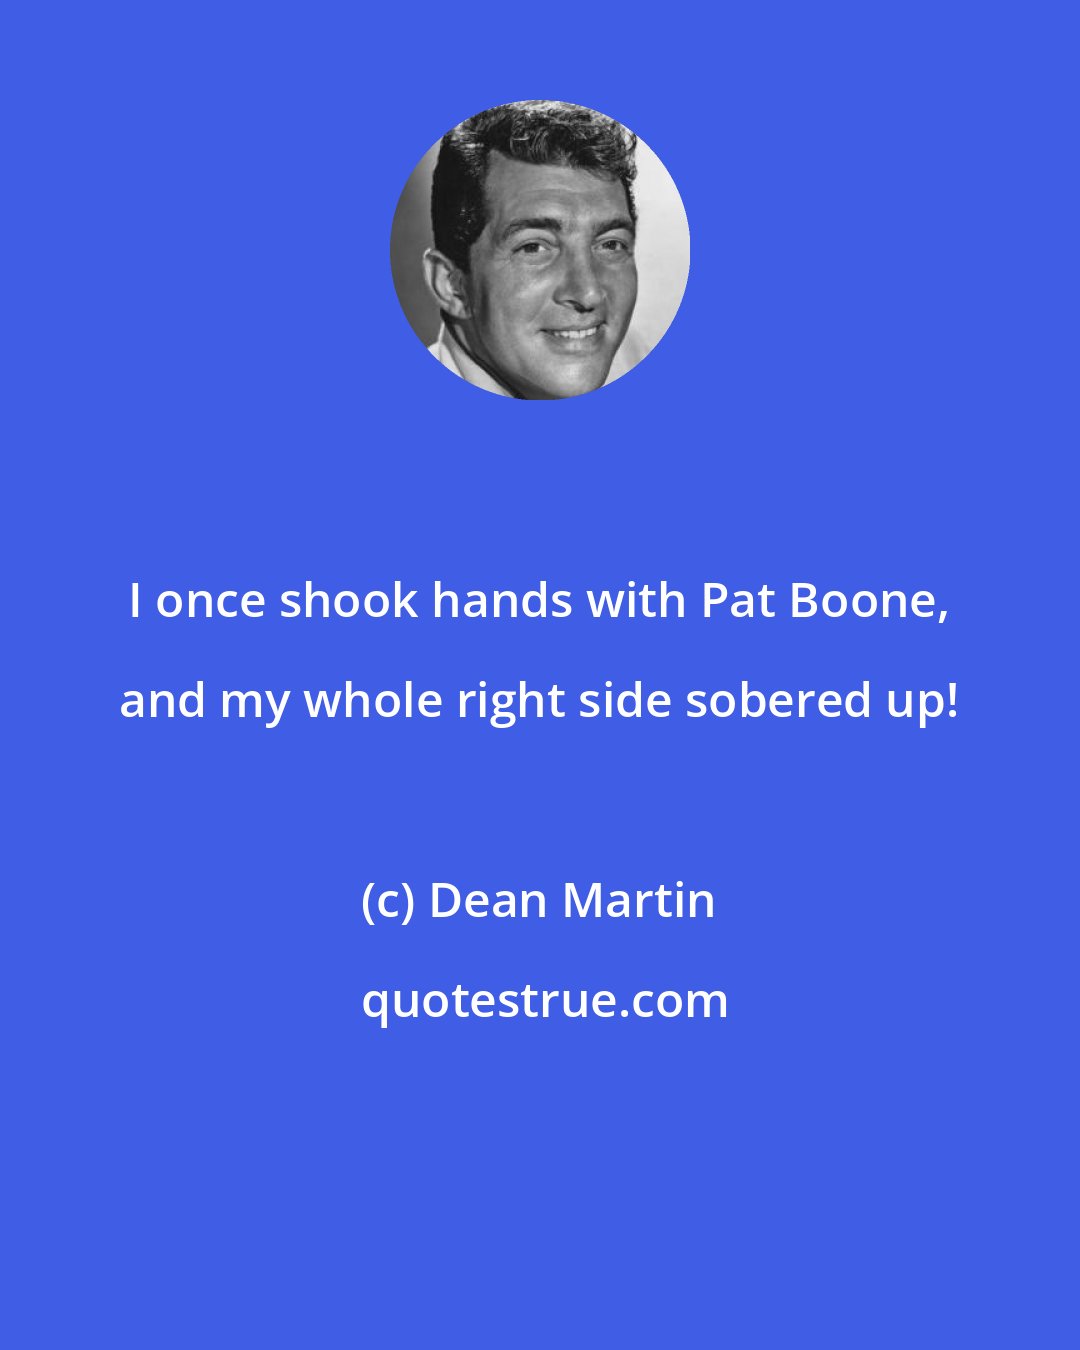 Dean Martin: I once shook hands with Pat Boone, and my whole right side sobered up!